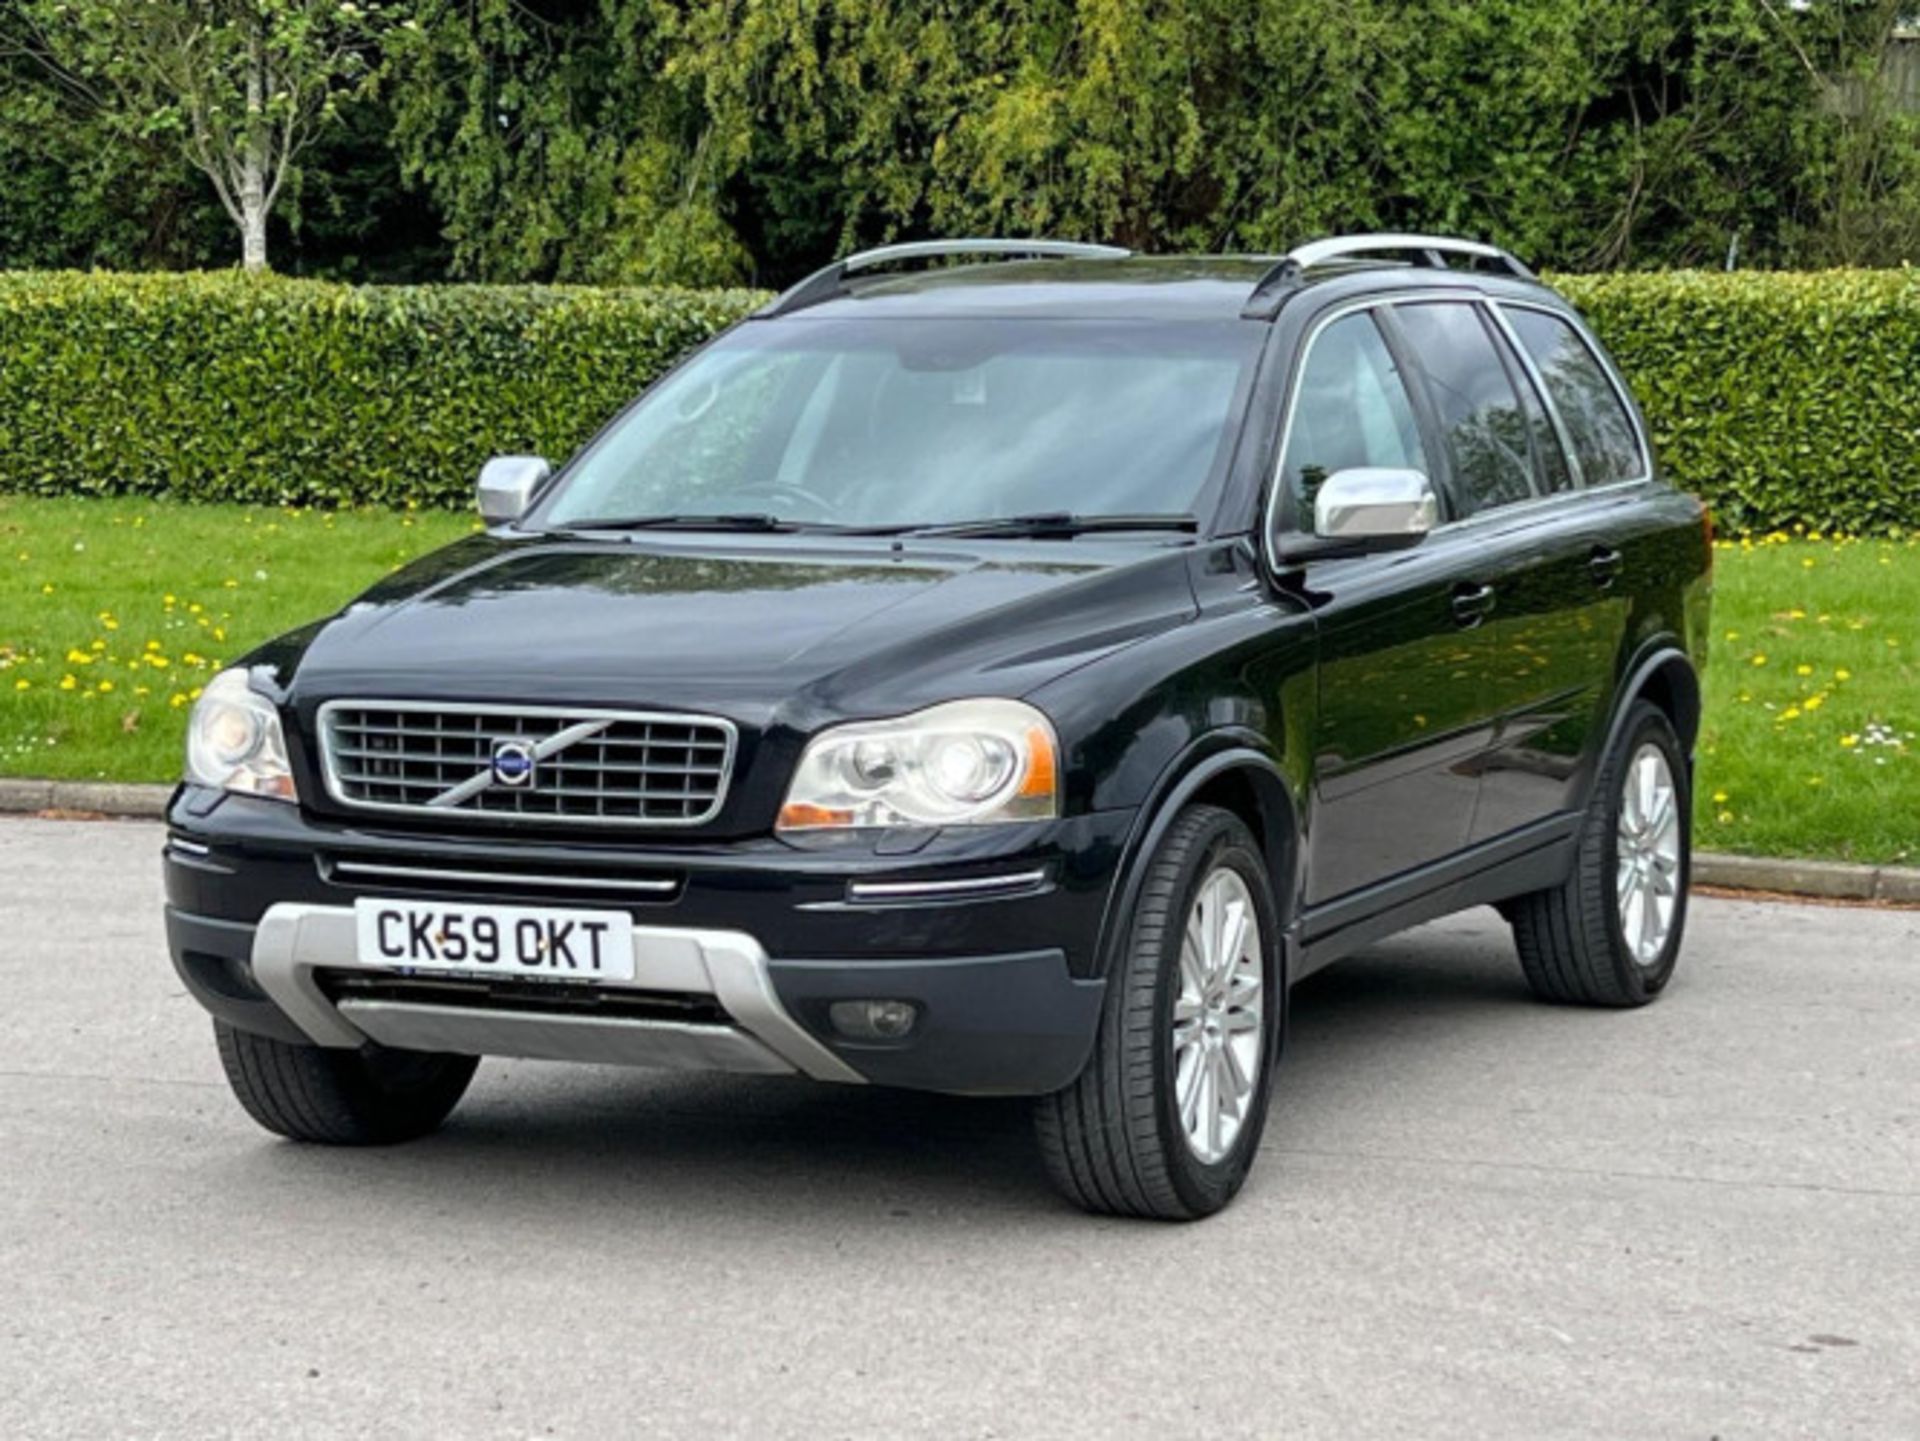 VOLVO XC90 2.4 D5 EXECUTIVE GEARTRONIC AWD, 5DR >>--NO VAT ON HAMMER--<< - Image 2 of 136